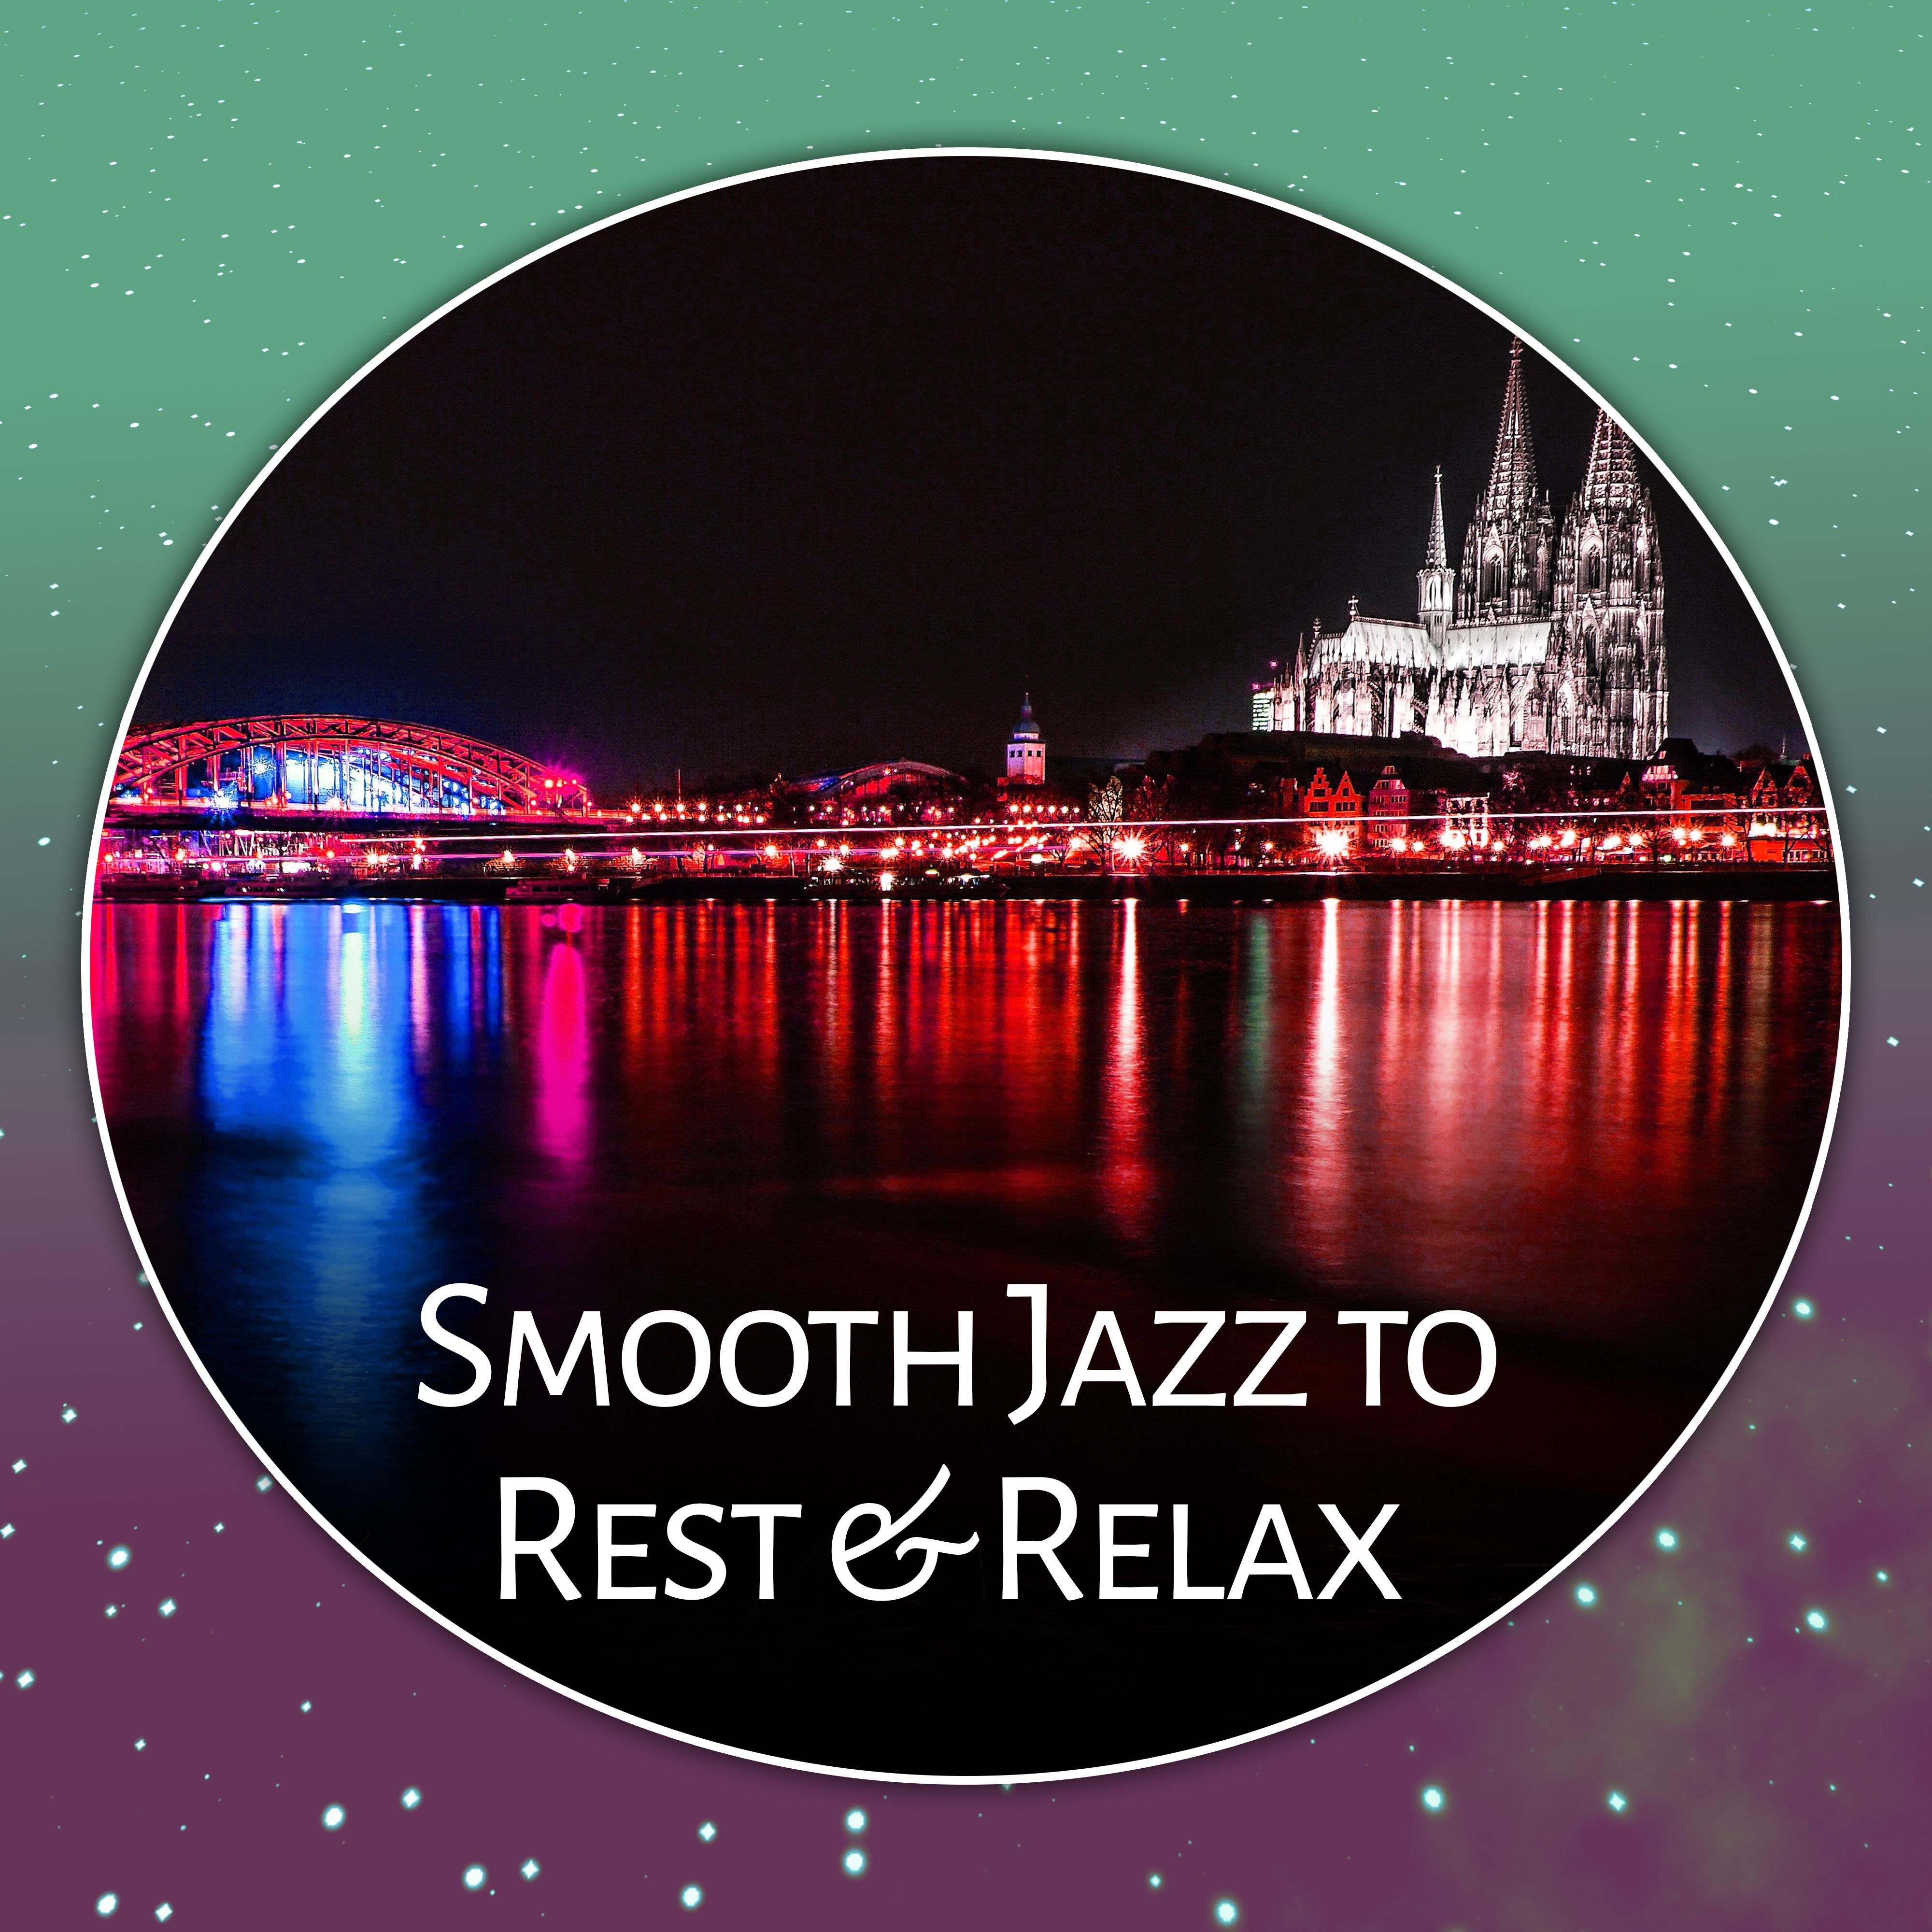 Smooth Jazz to Rest  Relax  Easy Listening, Piano Relaxation, Stress Relief, Shades of Jazz